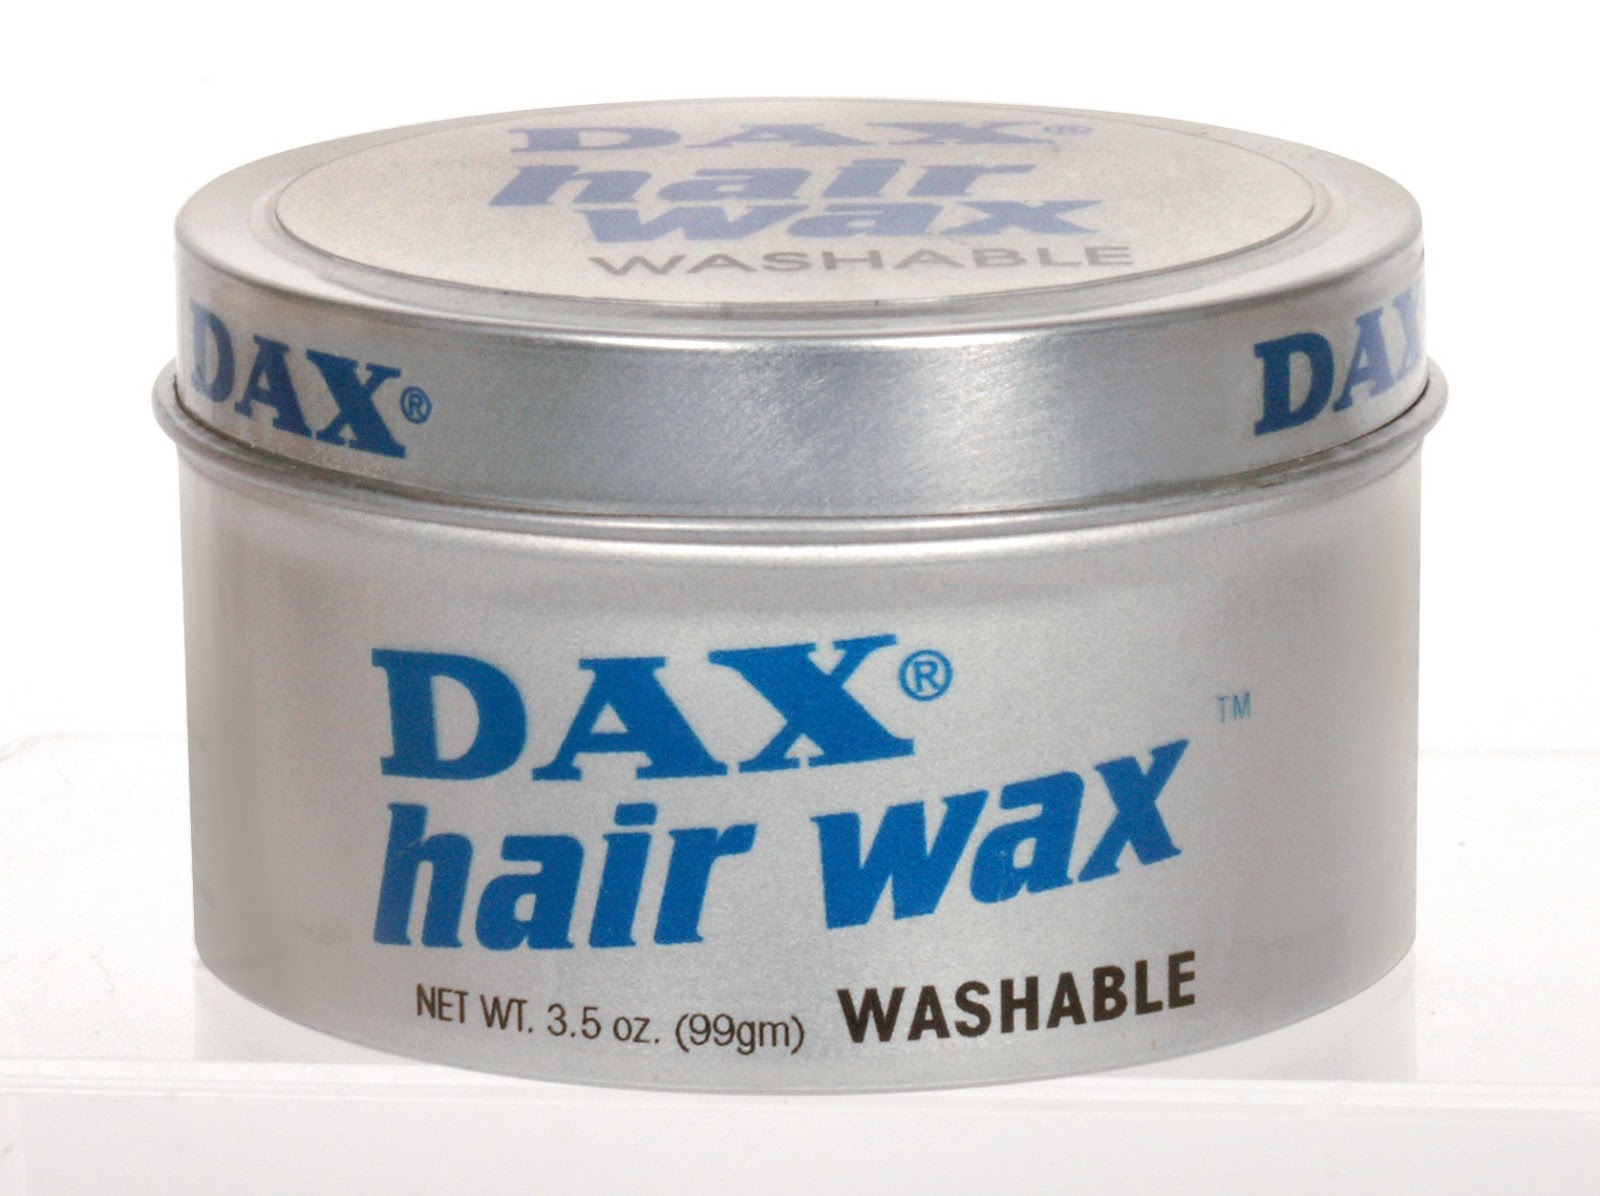 Dax Blue Hair Wax How to Use - wide 8